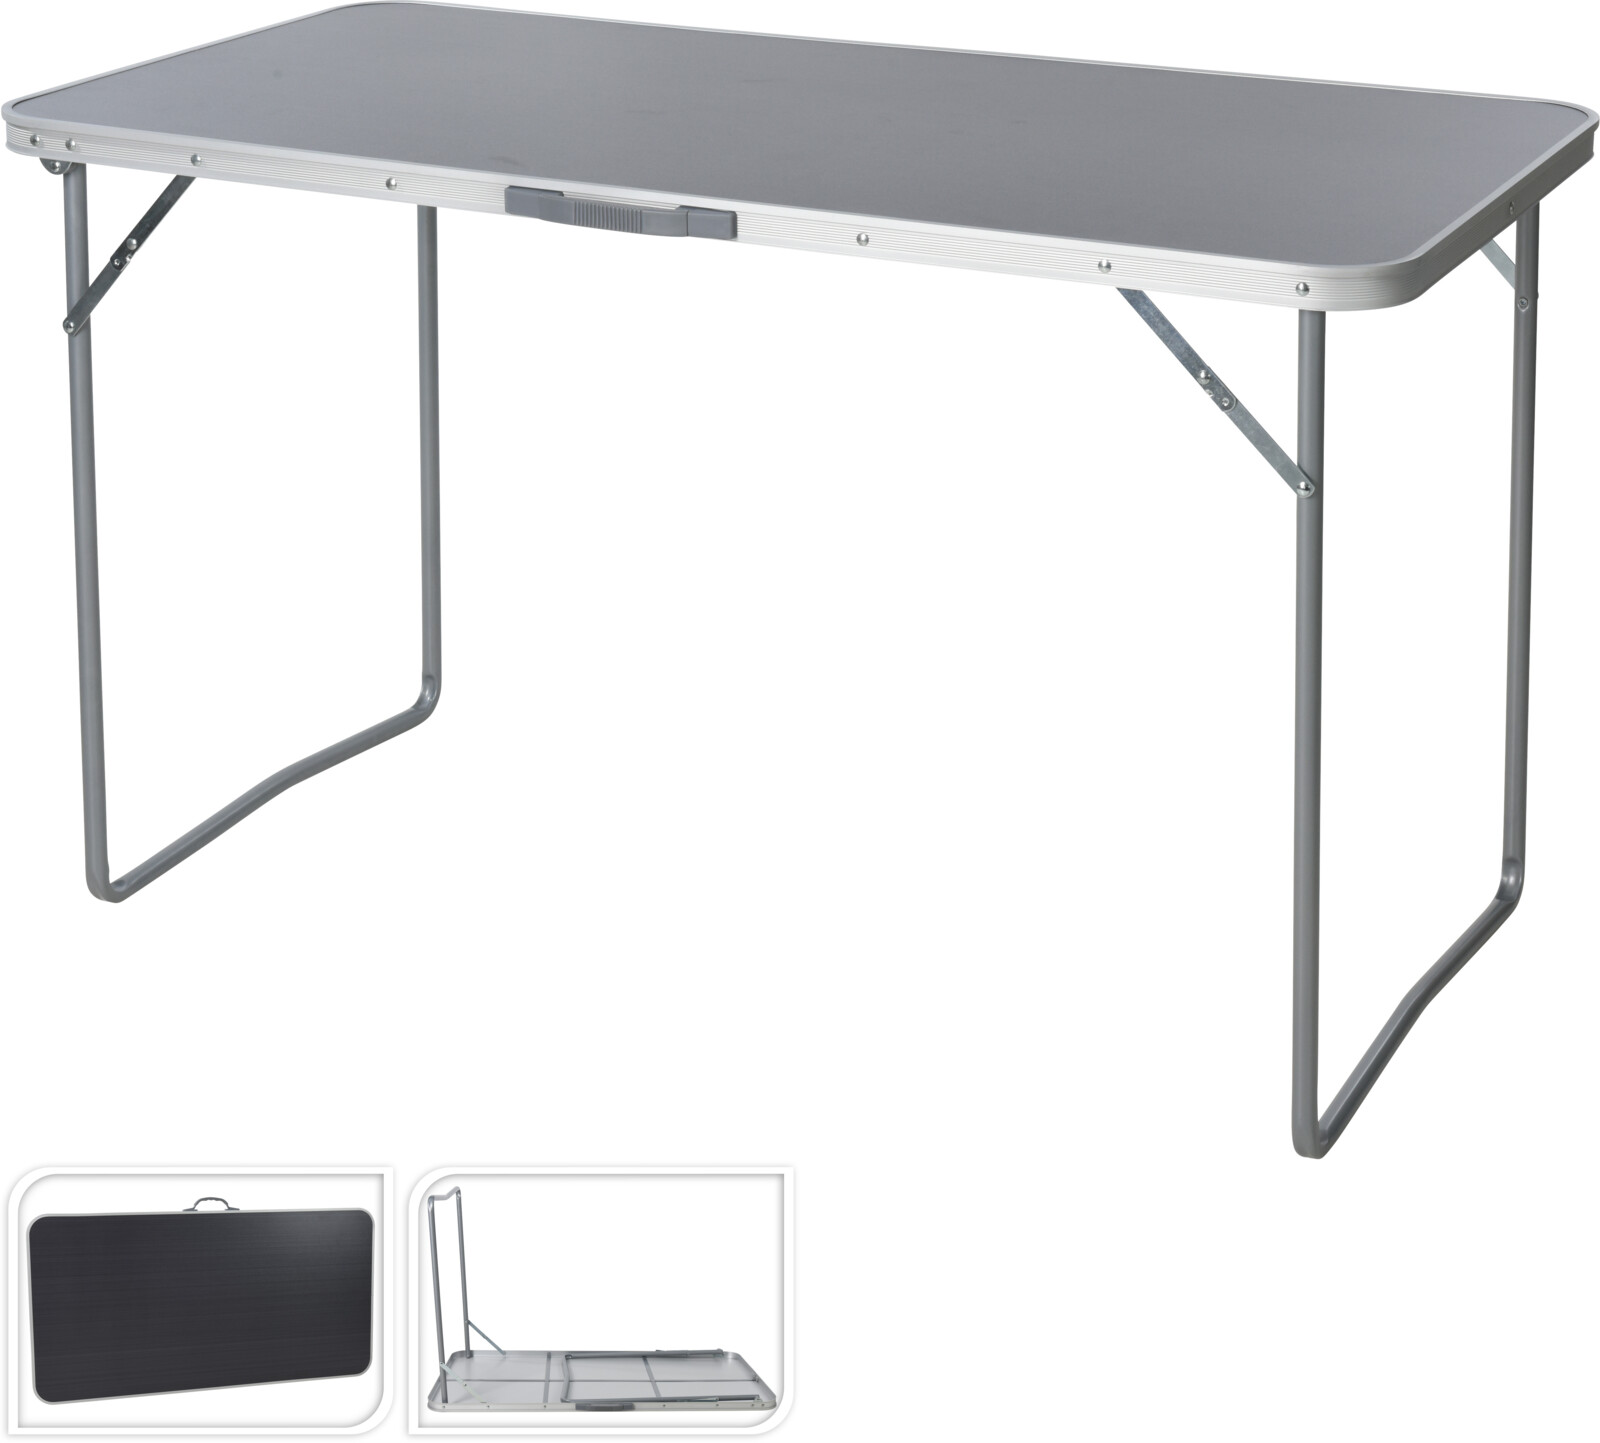 FOLDABLE CAMPING TABLE 120X60X70CM GREY